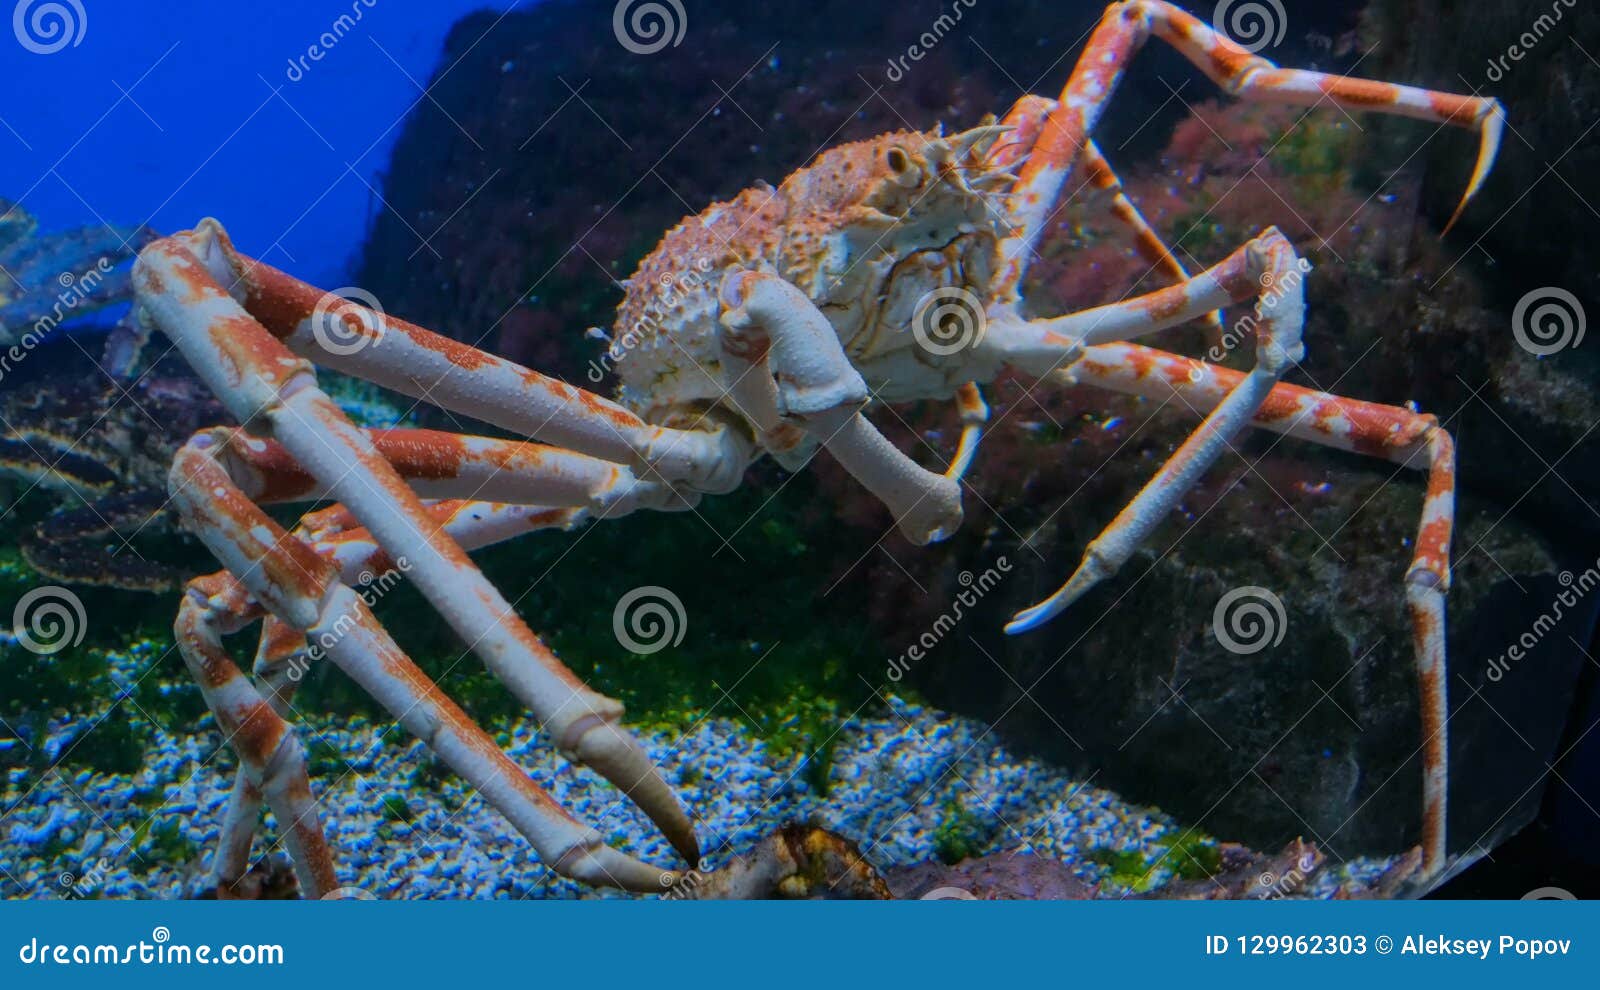 342 Giant Japanese Spider Crab Photos Free Royalty Free Stock Photos From Dreamstime